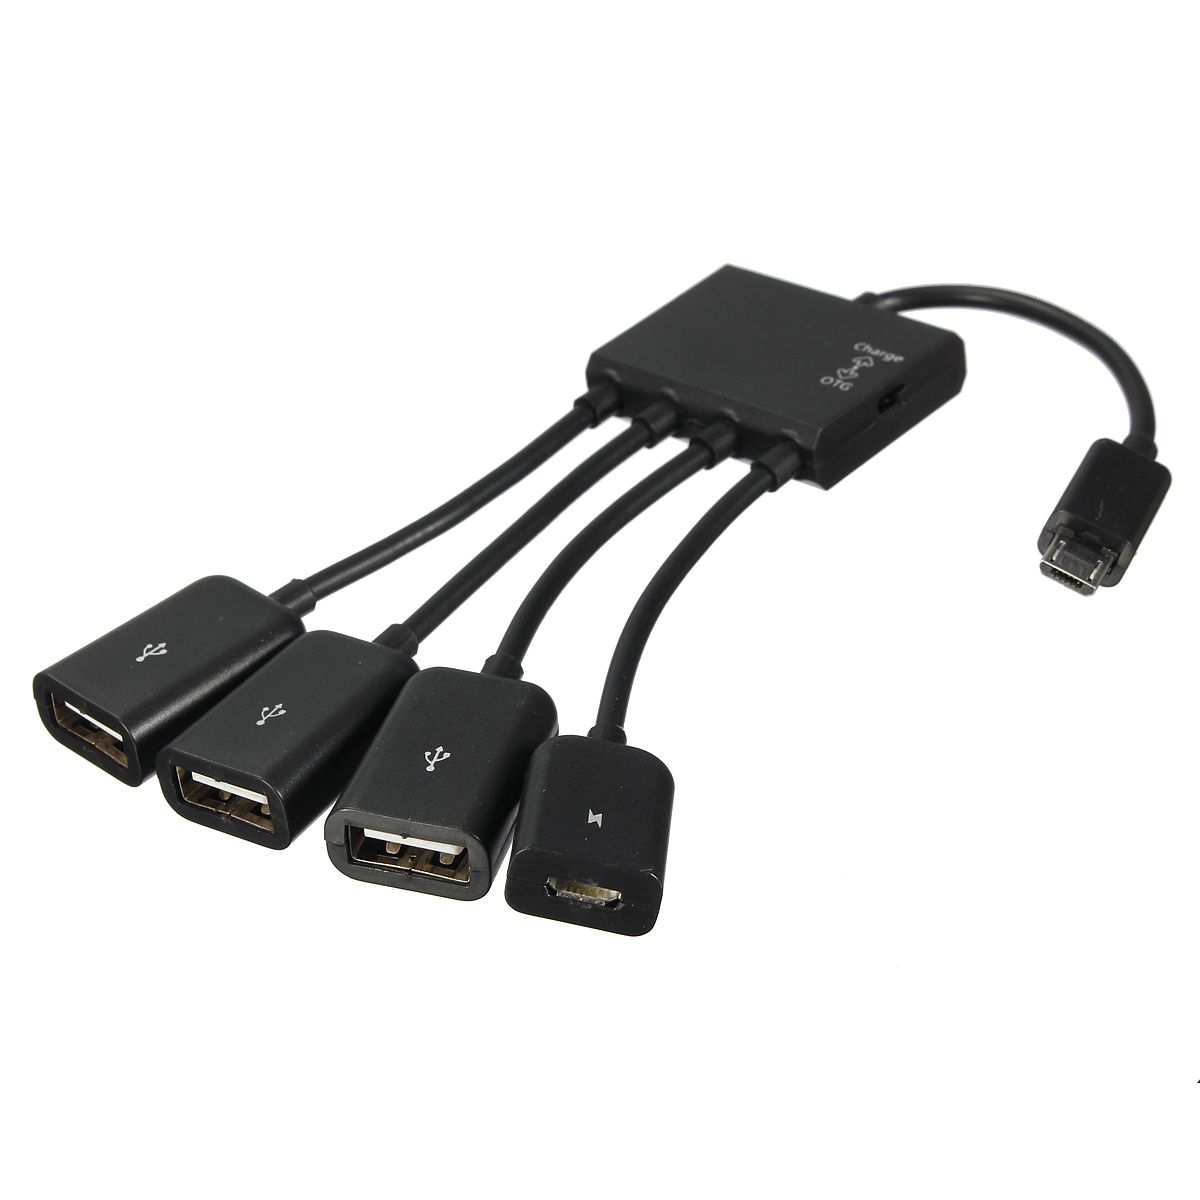 4-Port-Micro-USB-OTG-Hub-Adapter-Cable-Data-Line-Power-Charging-for-Galaxy-S5-S4-S3-Google-Nexus-947726